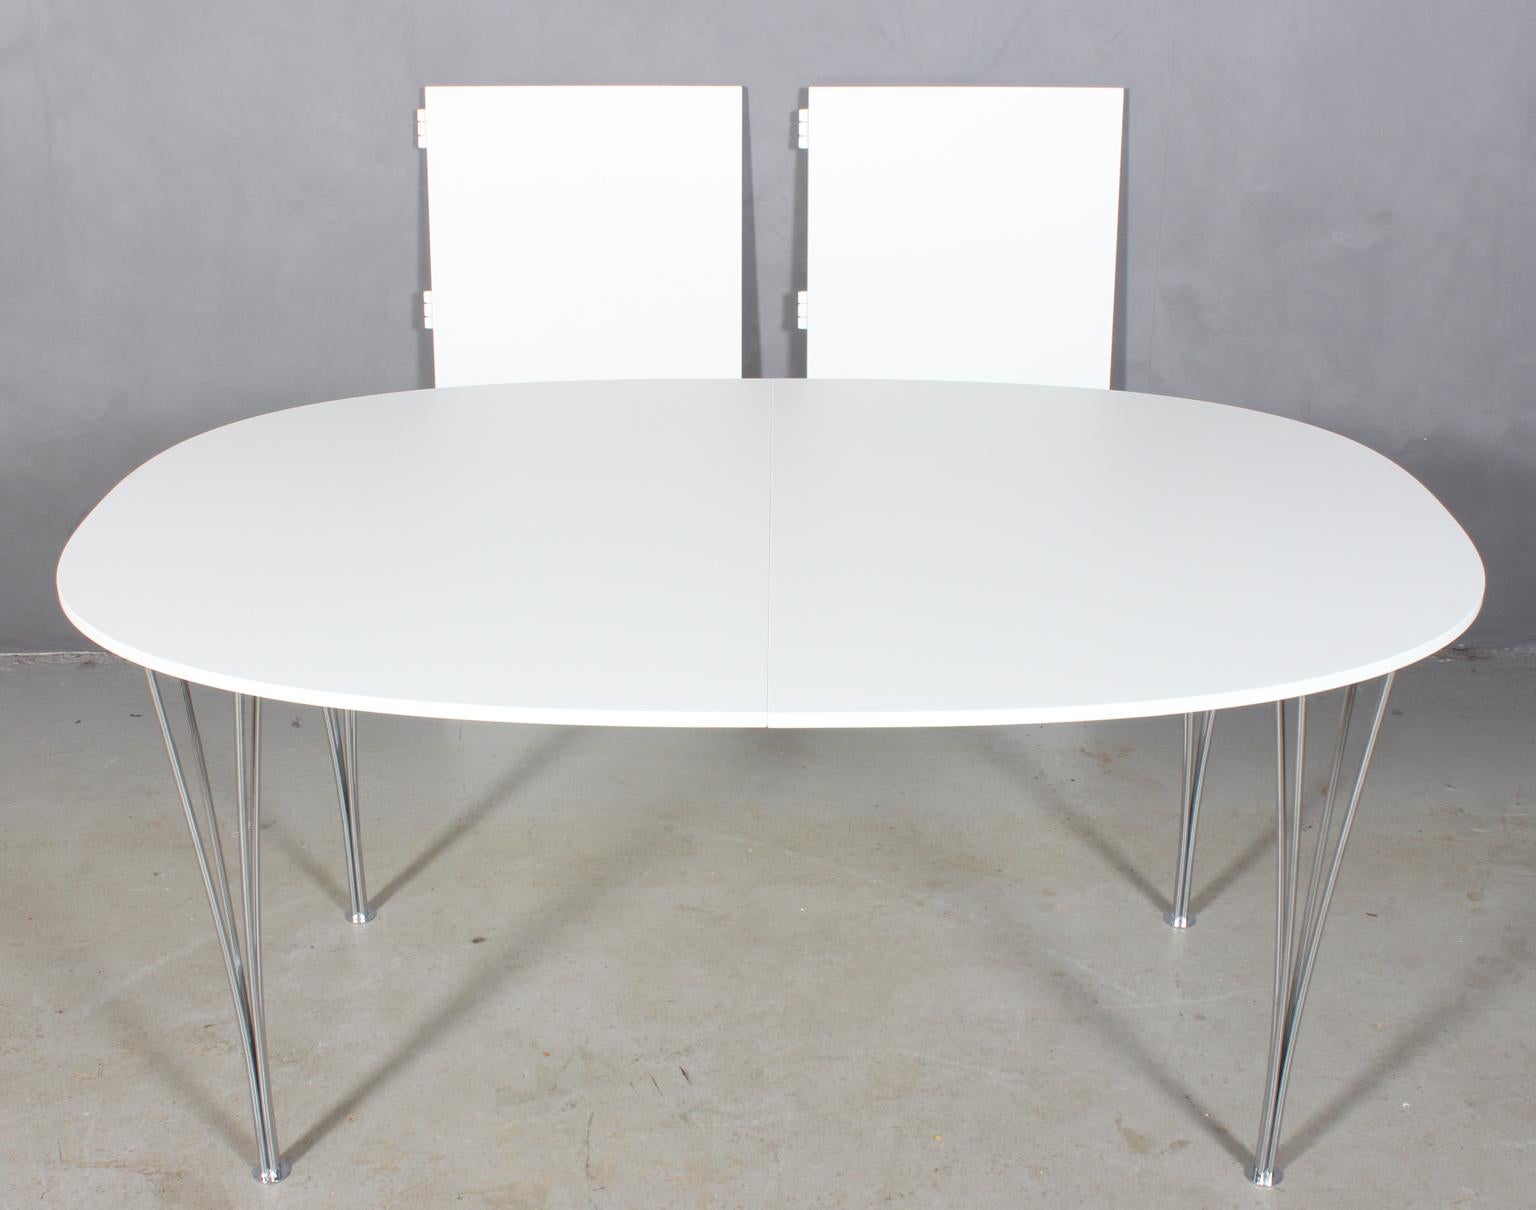 Piet Hein & Bruno Mathsson dining table with new professional lacquered white plate.

Two extension leaf of 50 cms.

Legs of chromed metal.

Model Super Elipse, made by Fritz Hansen.

This is one of the most iconic tables in Scandinavia.